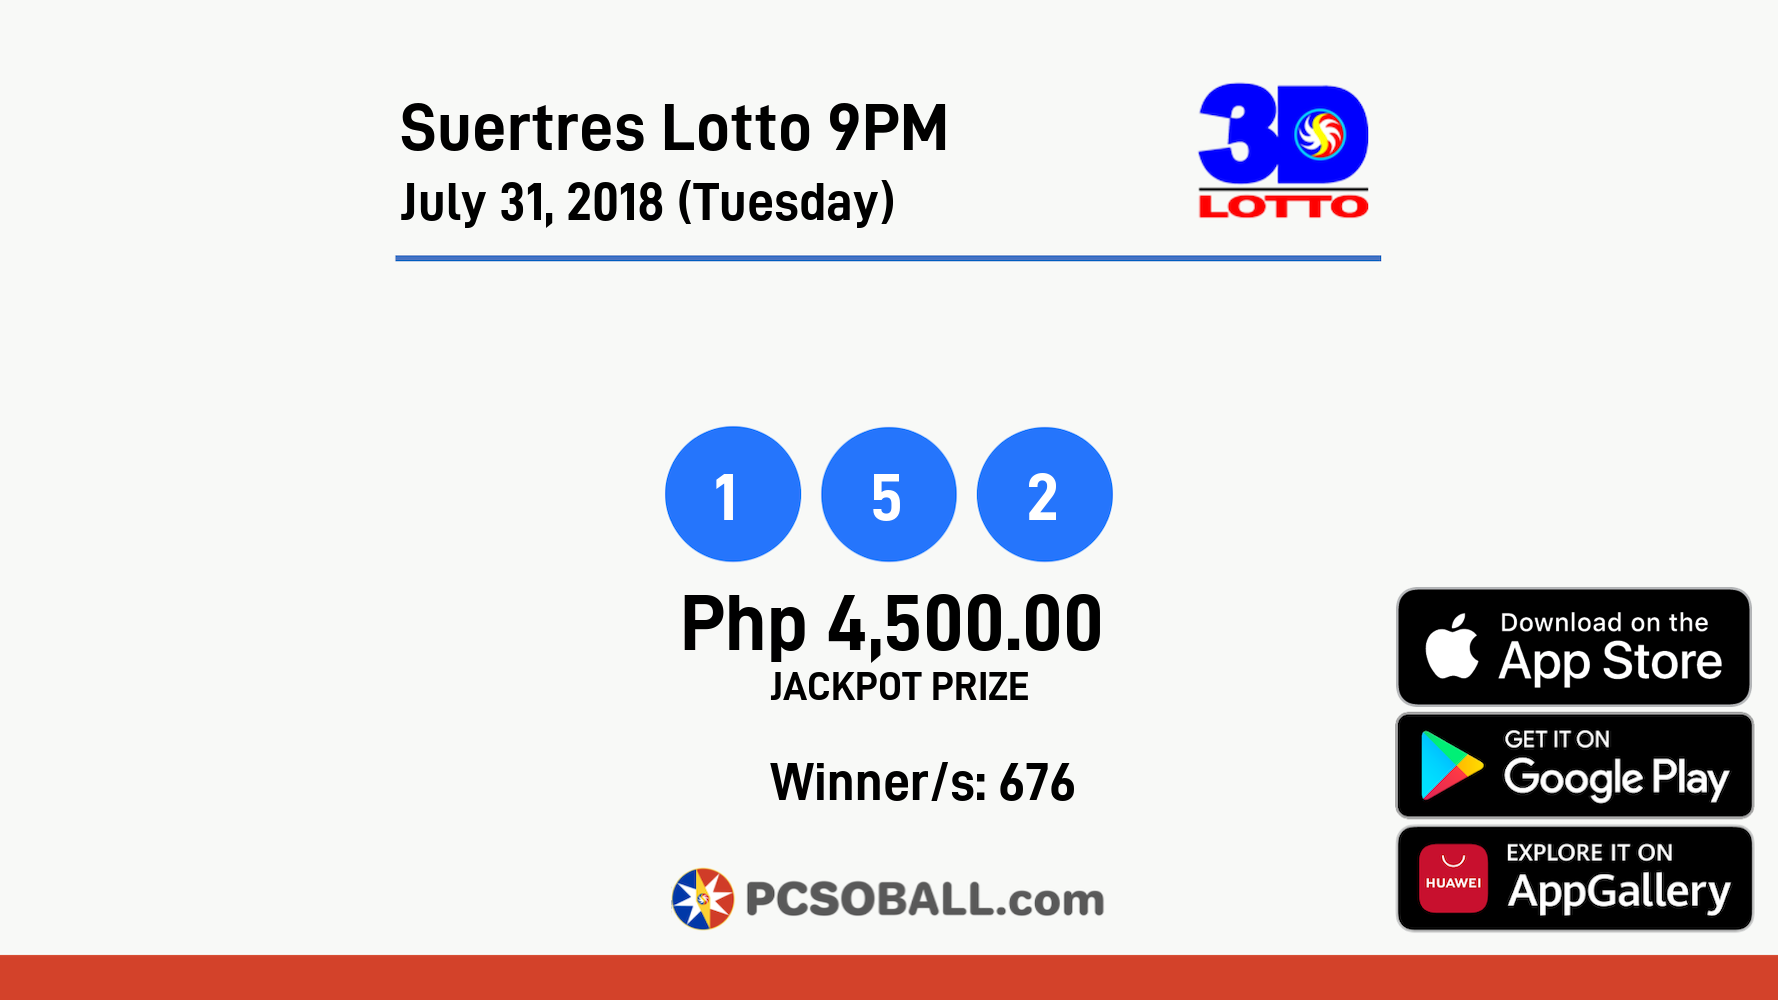 Suertres Lotto 9PM July 31, 2018 (Tuesday) Result